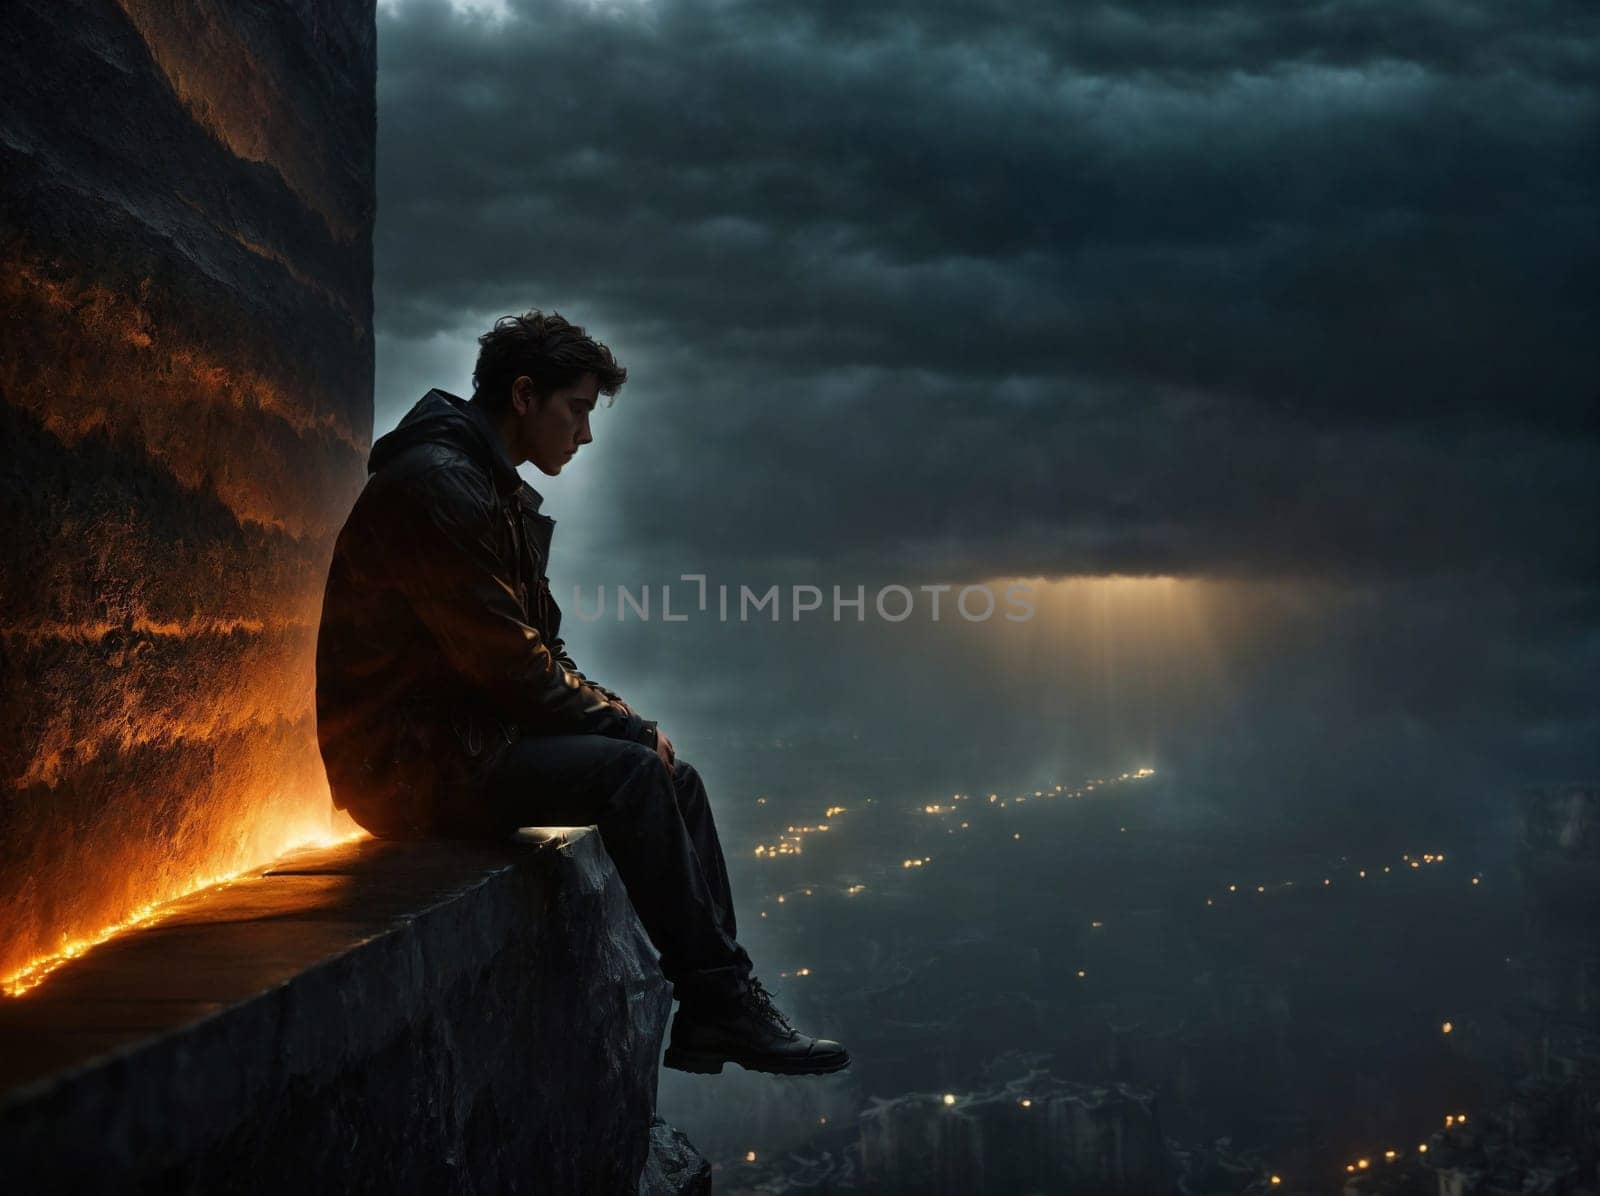 A man sits on top of a building next to a fire, creating an urban scene filled with danger and bravery.